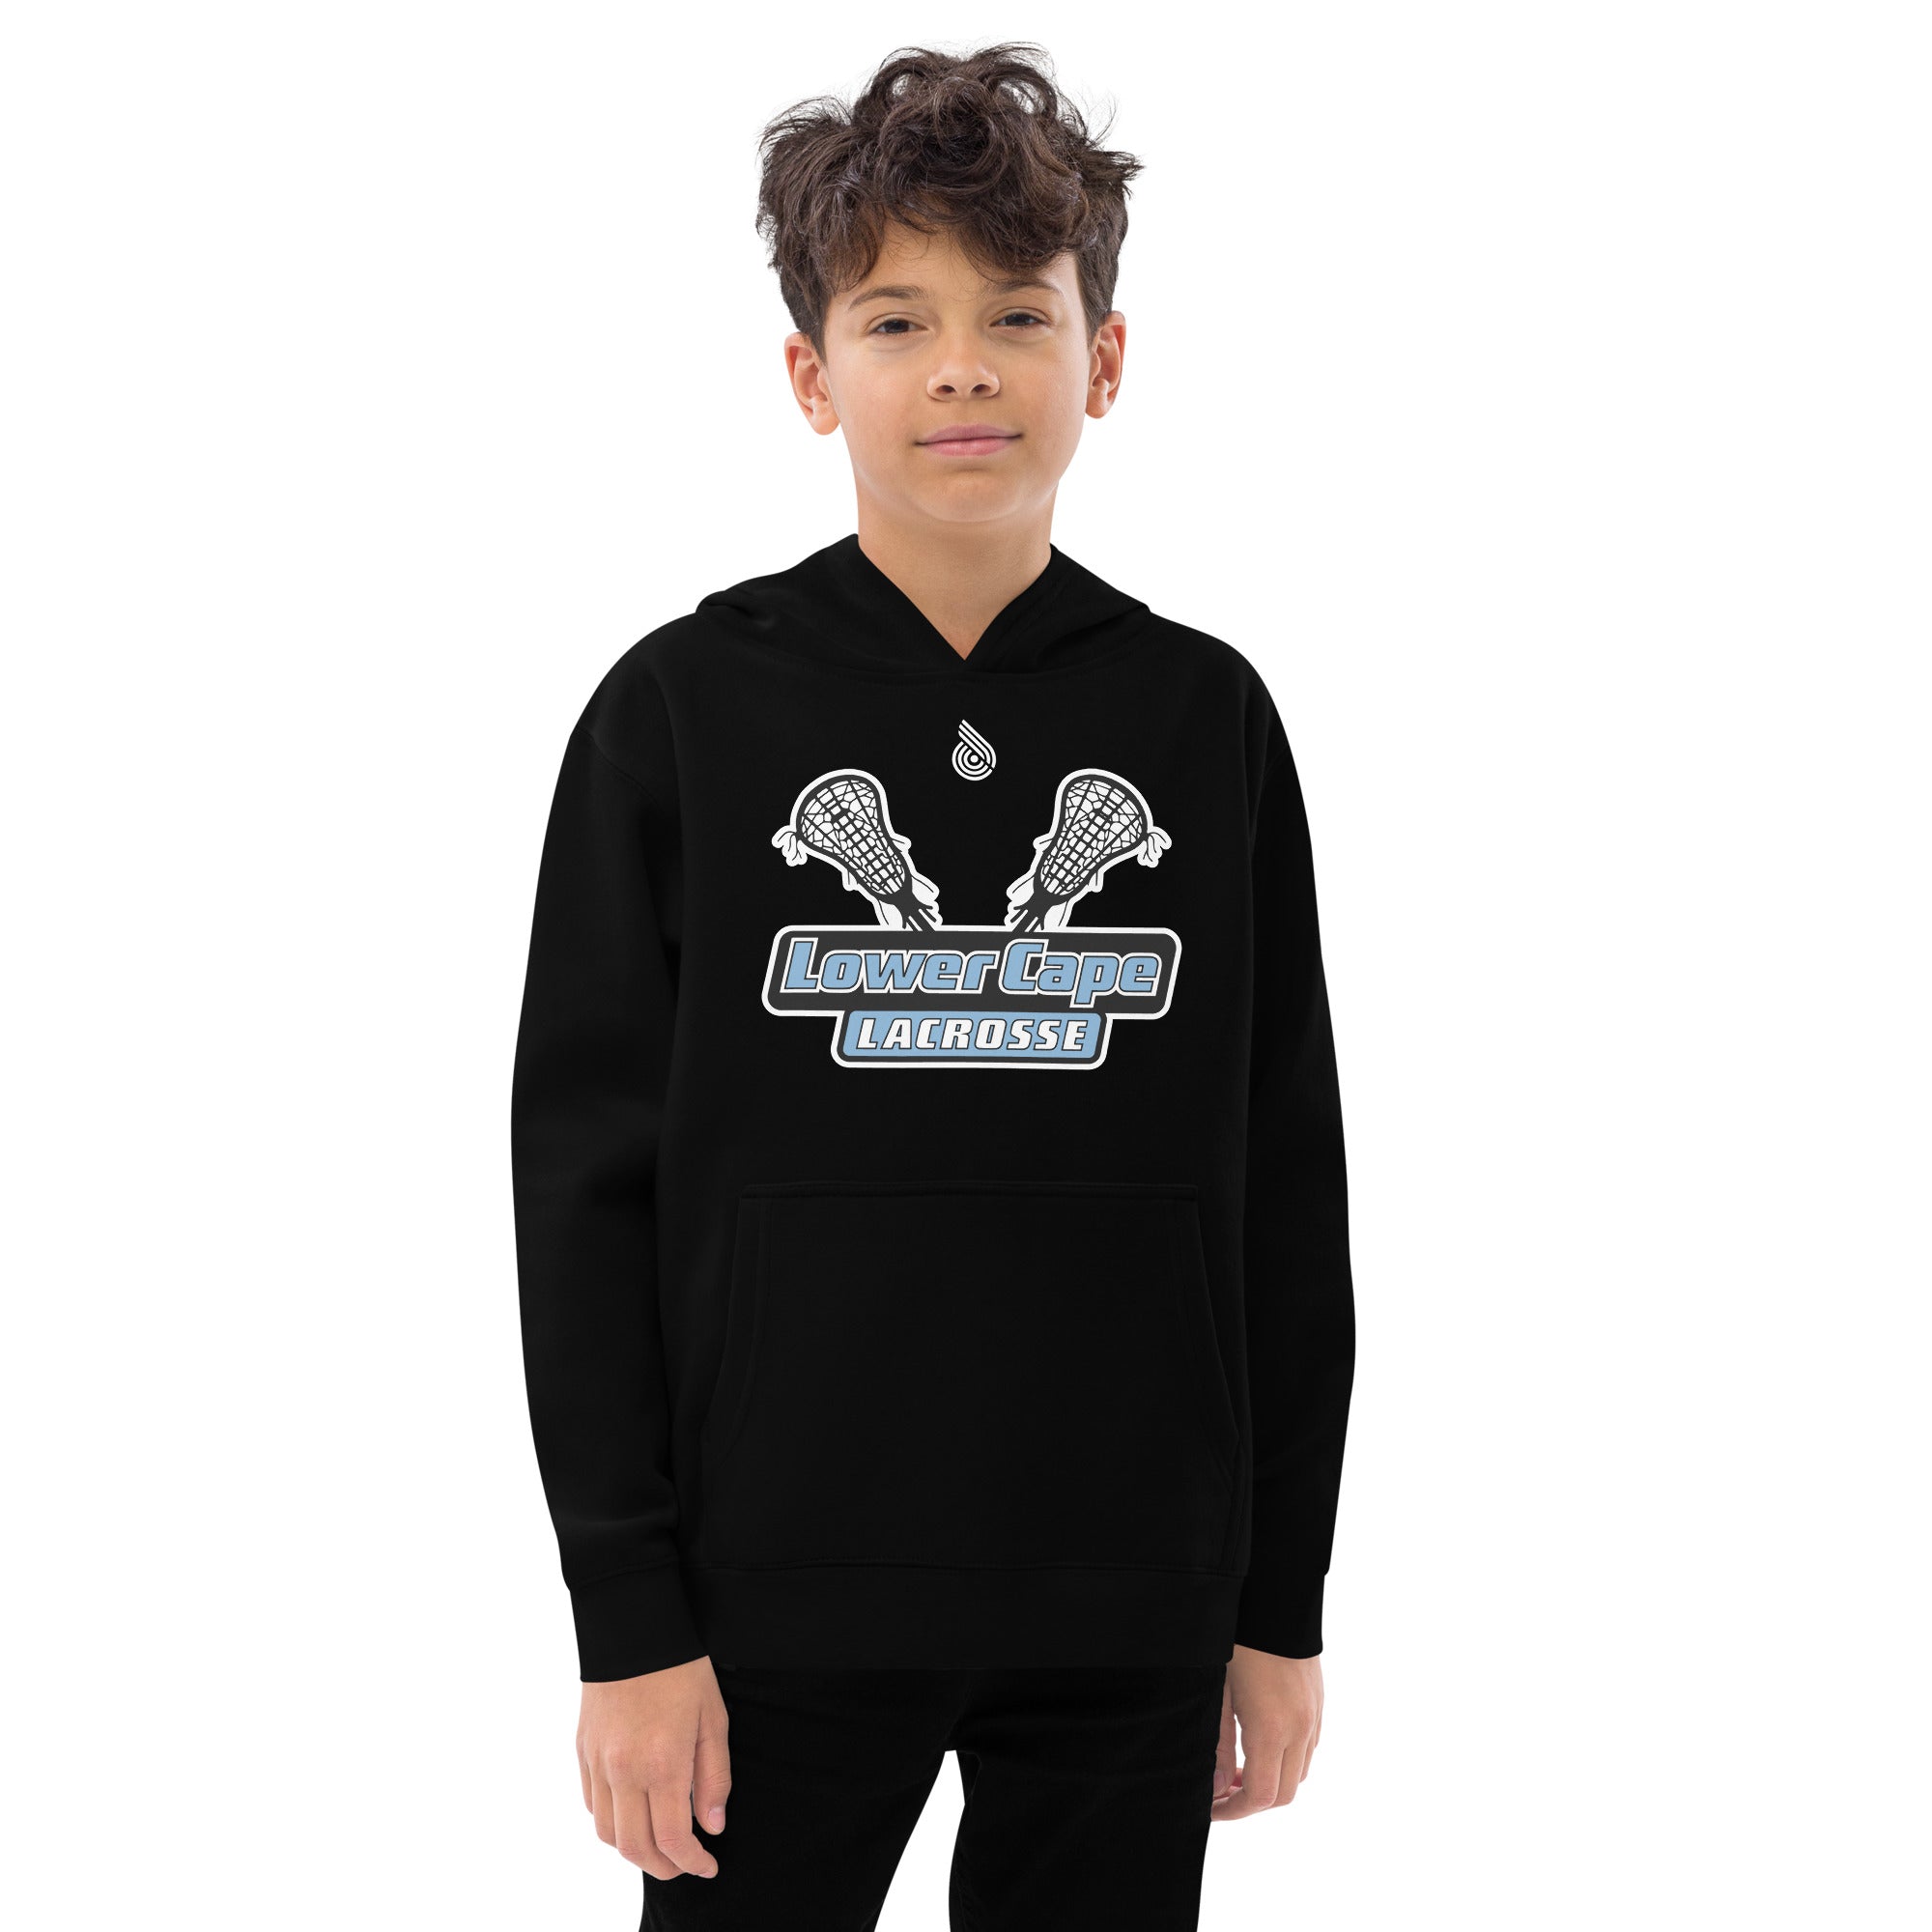 Lower Cape Youth Hoodie